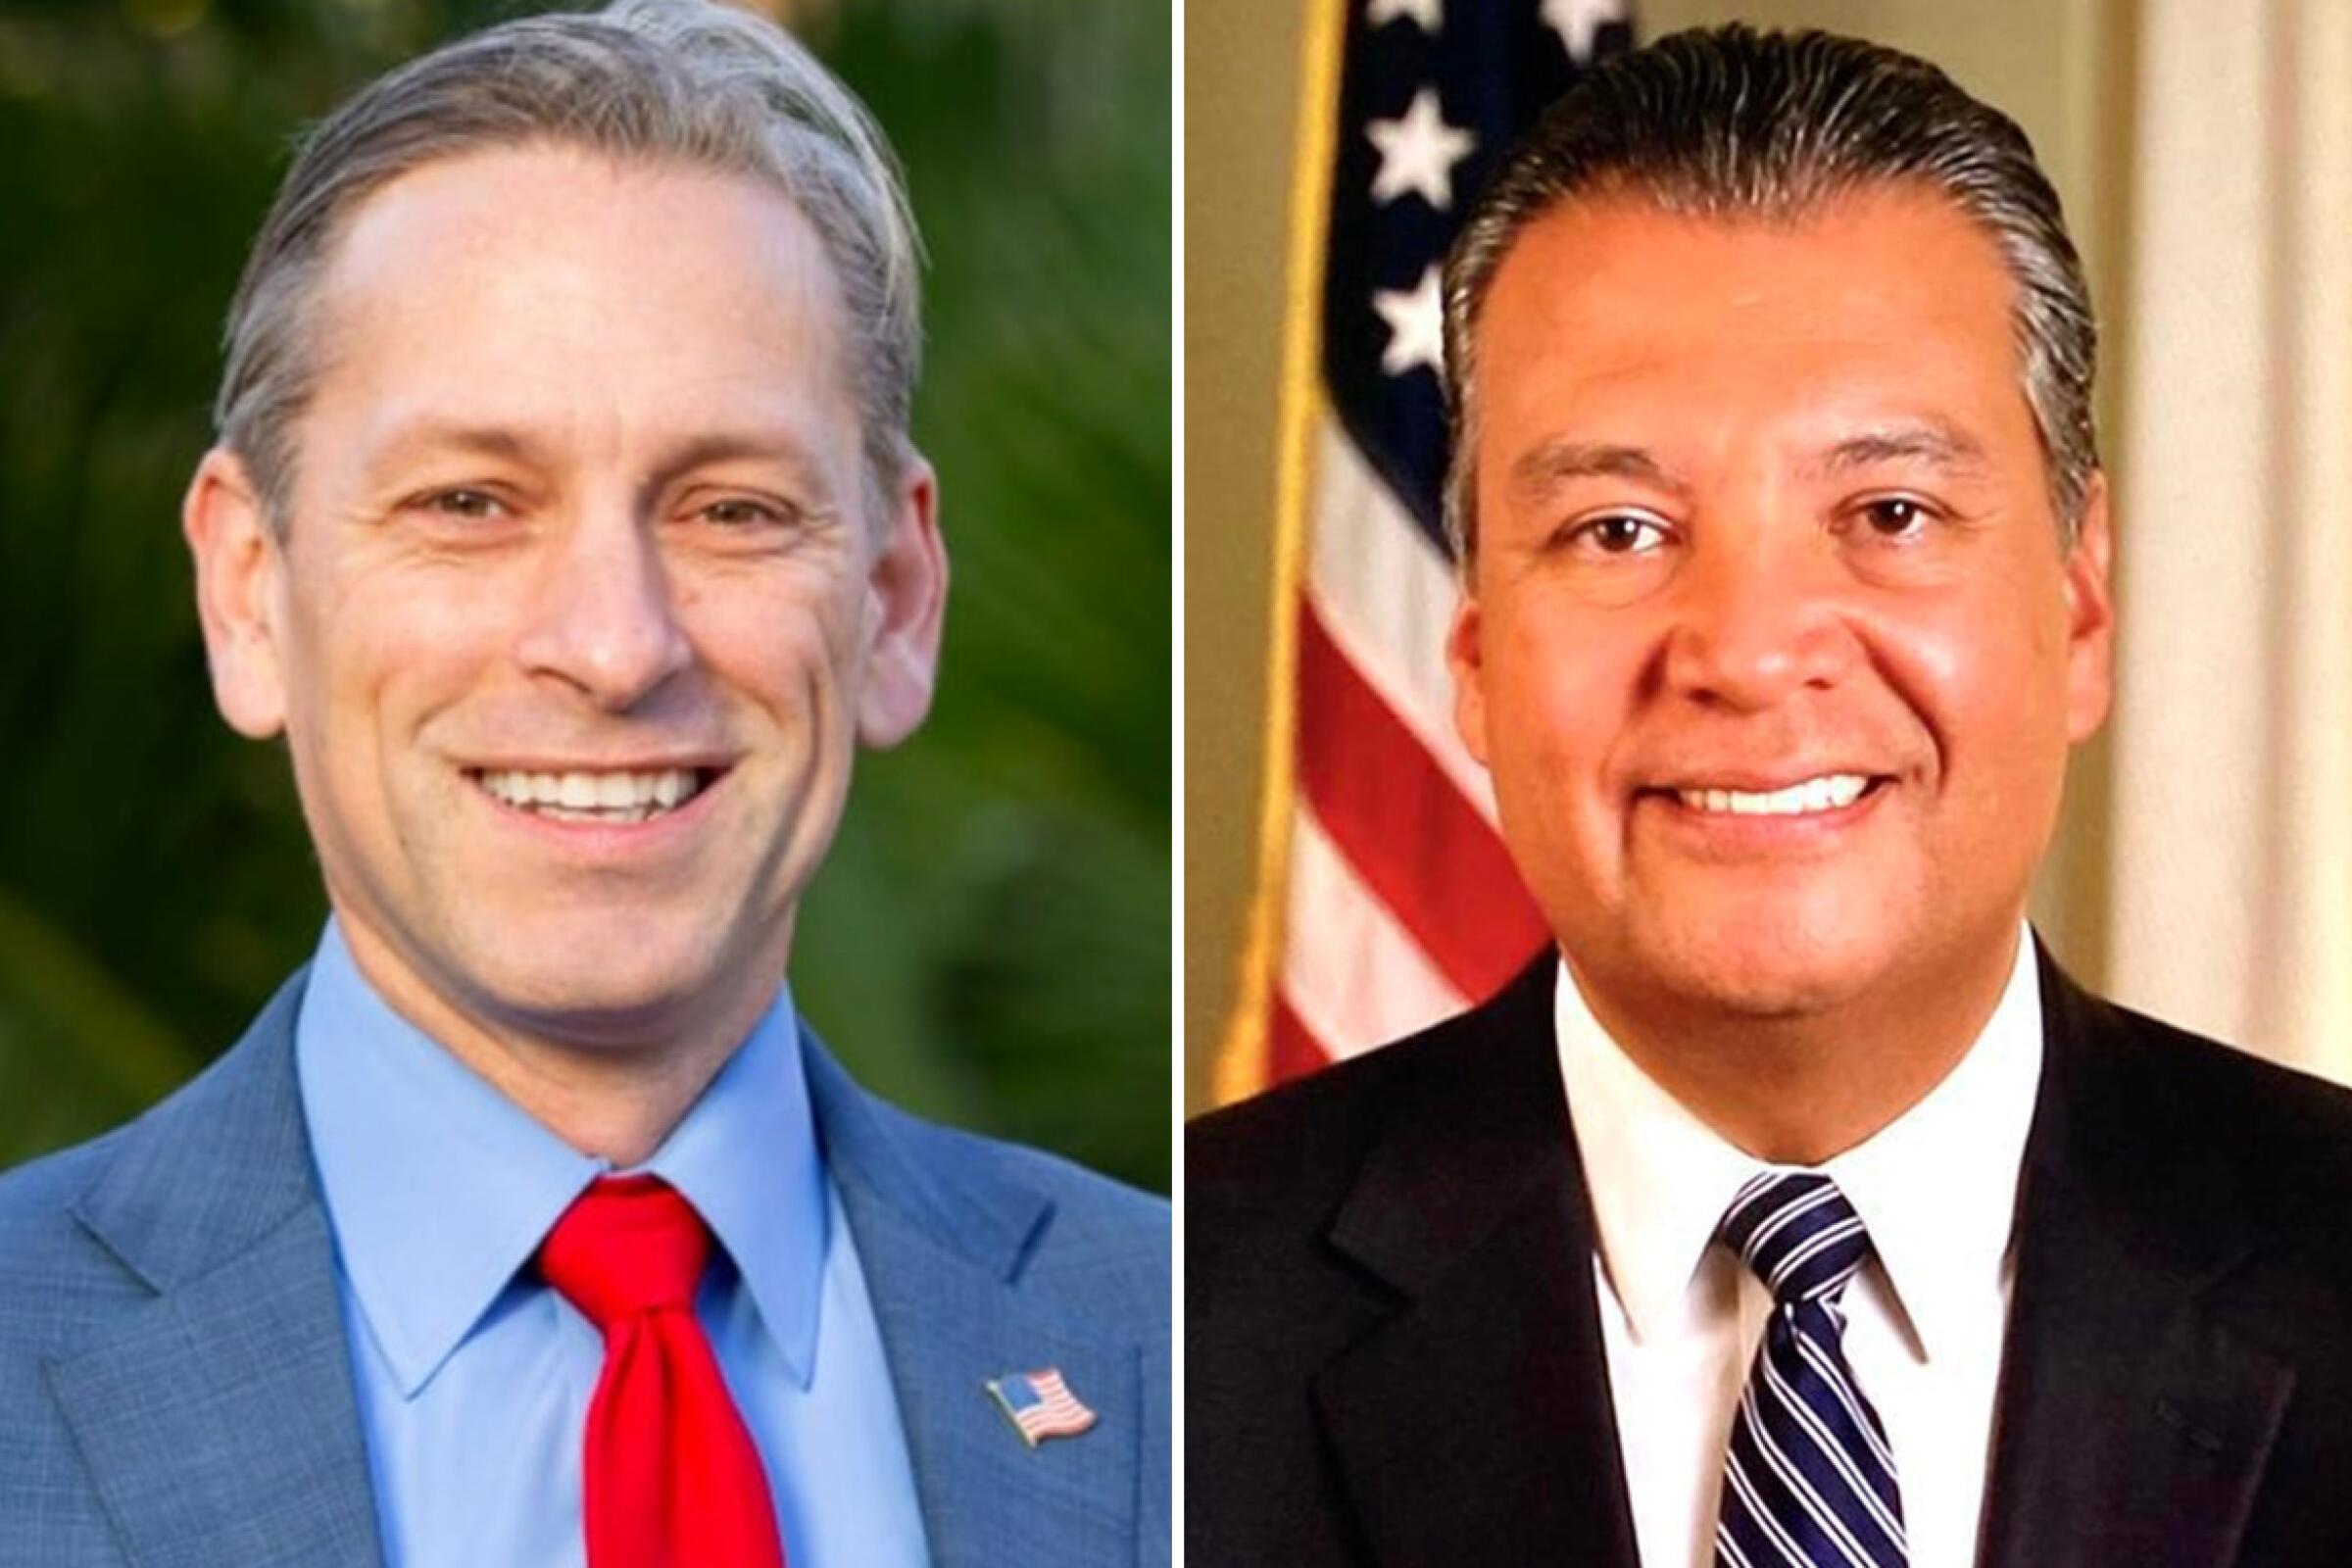 GOP attorney Mark Meuser, left, and Sen. Alex Padilla in side-by-side photos.